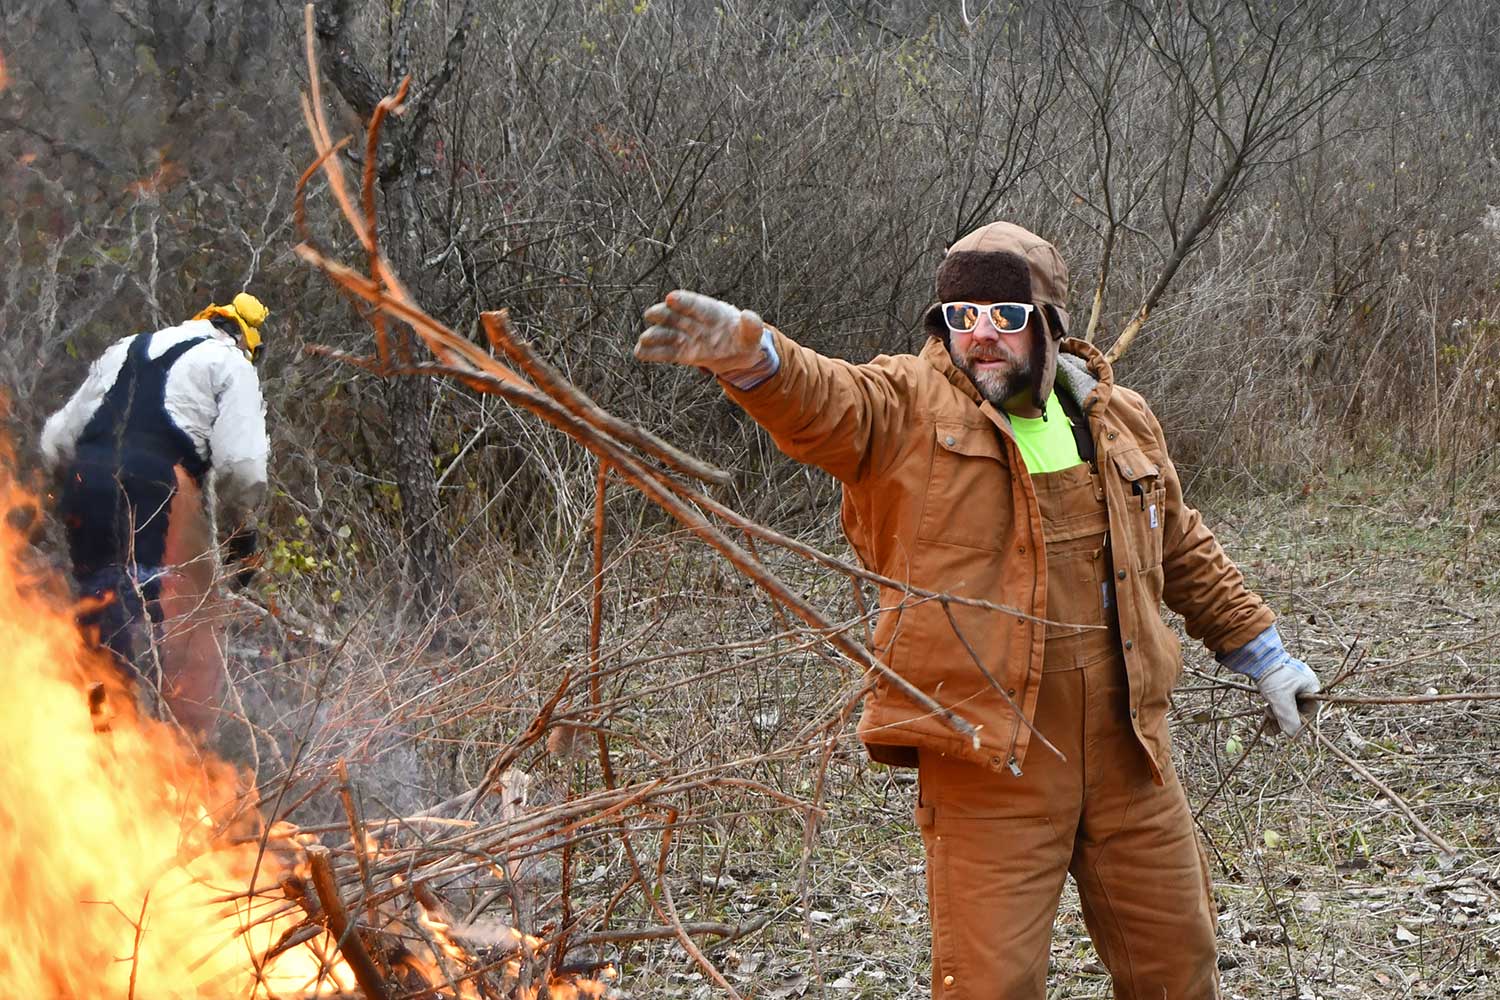 A person throwing brush on a burn pile while a person works in the background.